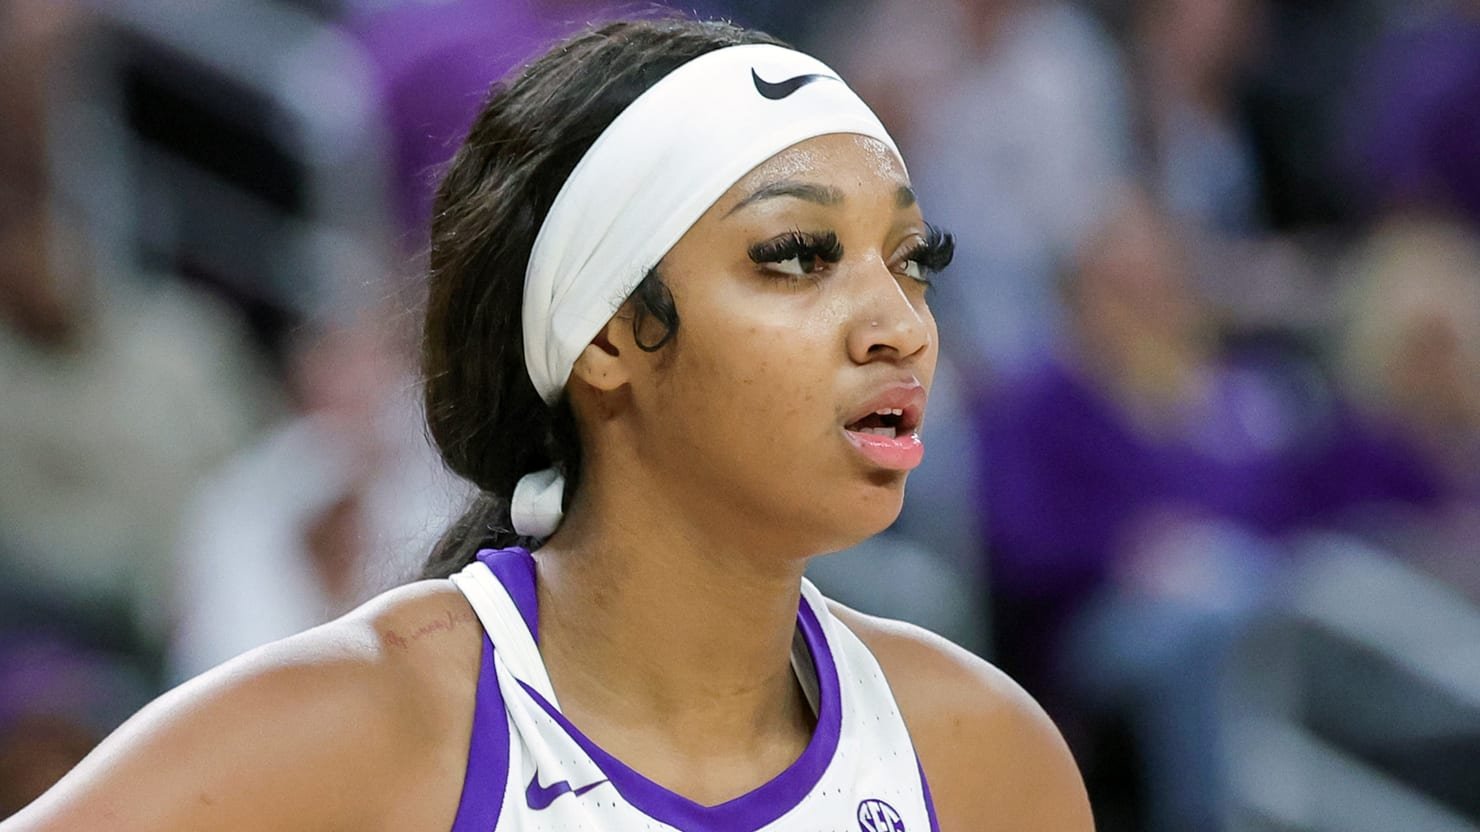 Drama Escalates as LSU Star Angel Reese Sits Out Game After Benching